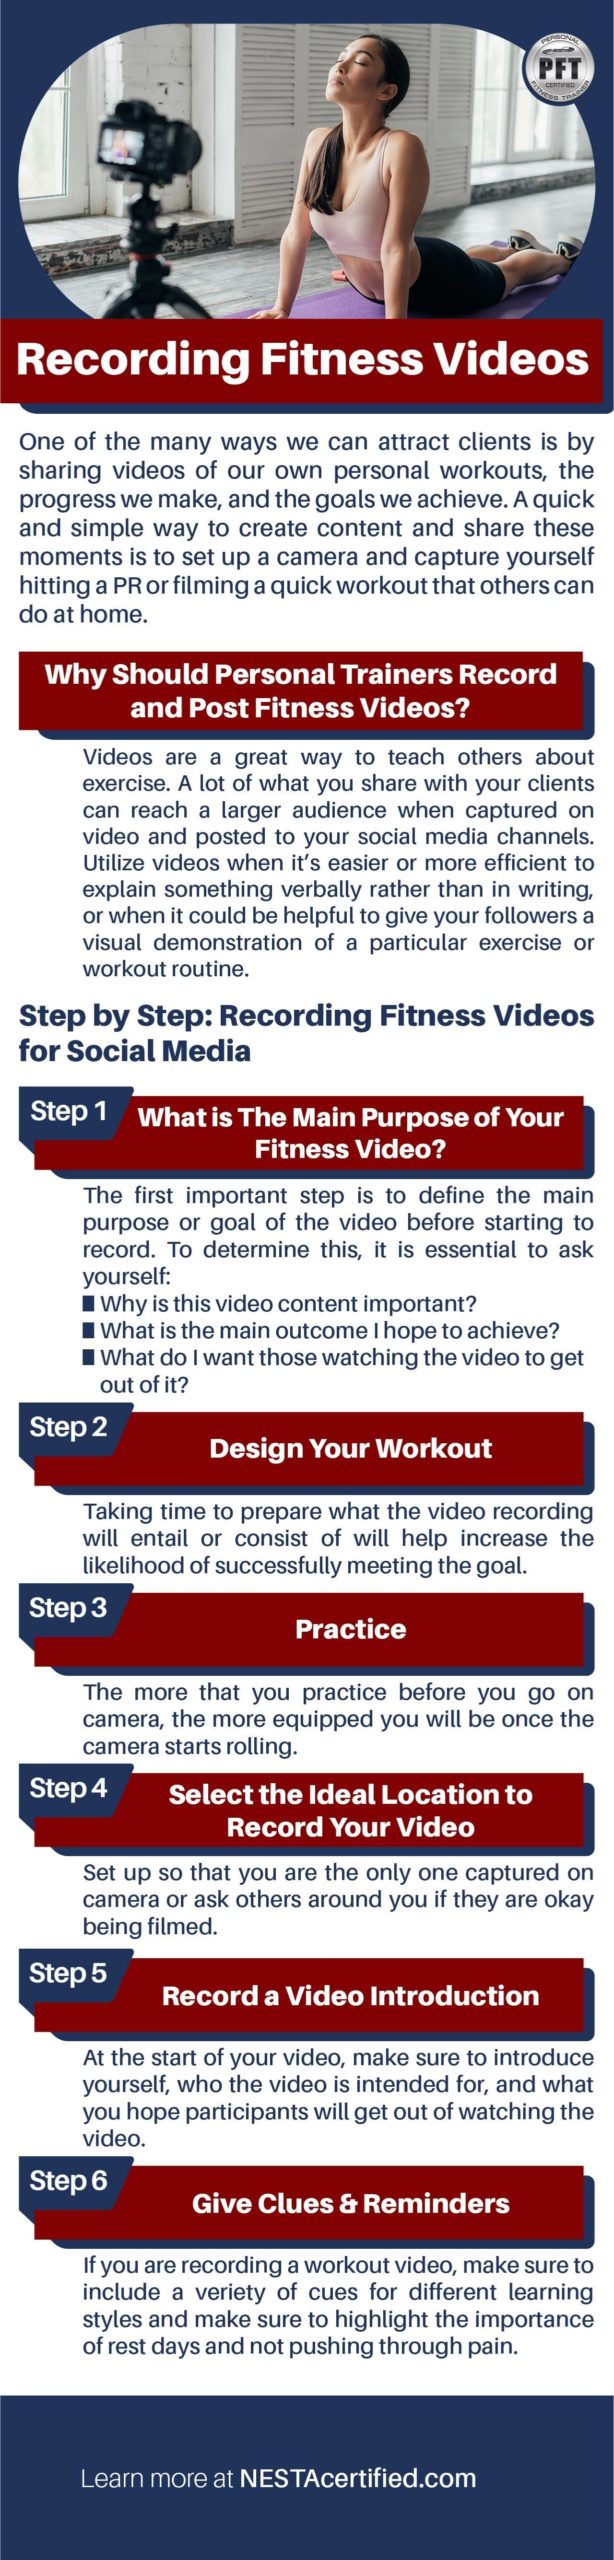 how-to-record-a-fitness-video-in-the-gym